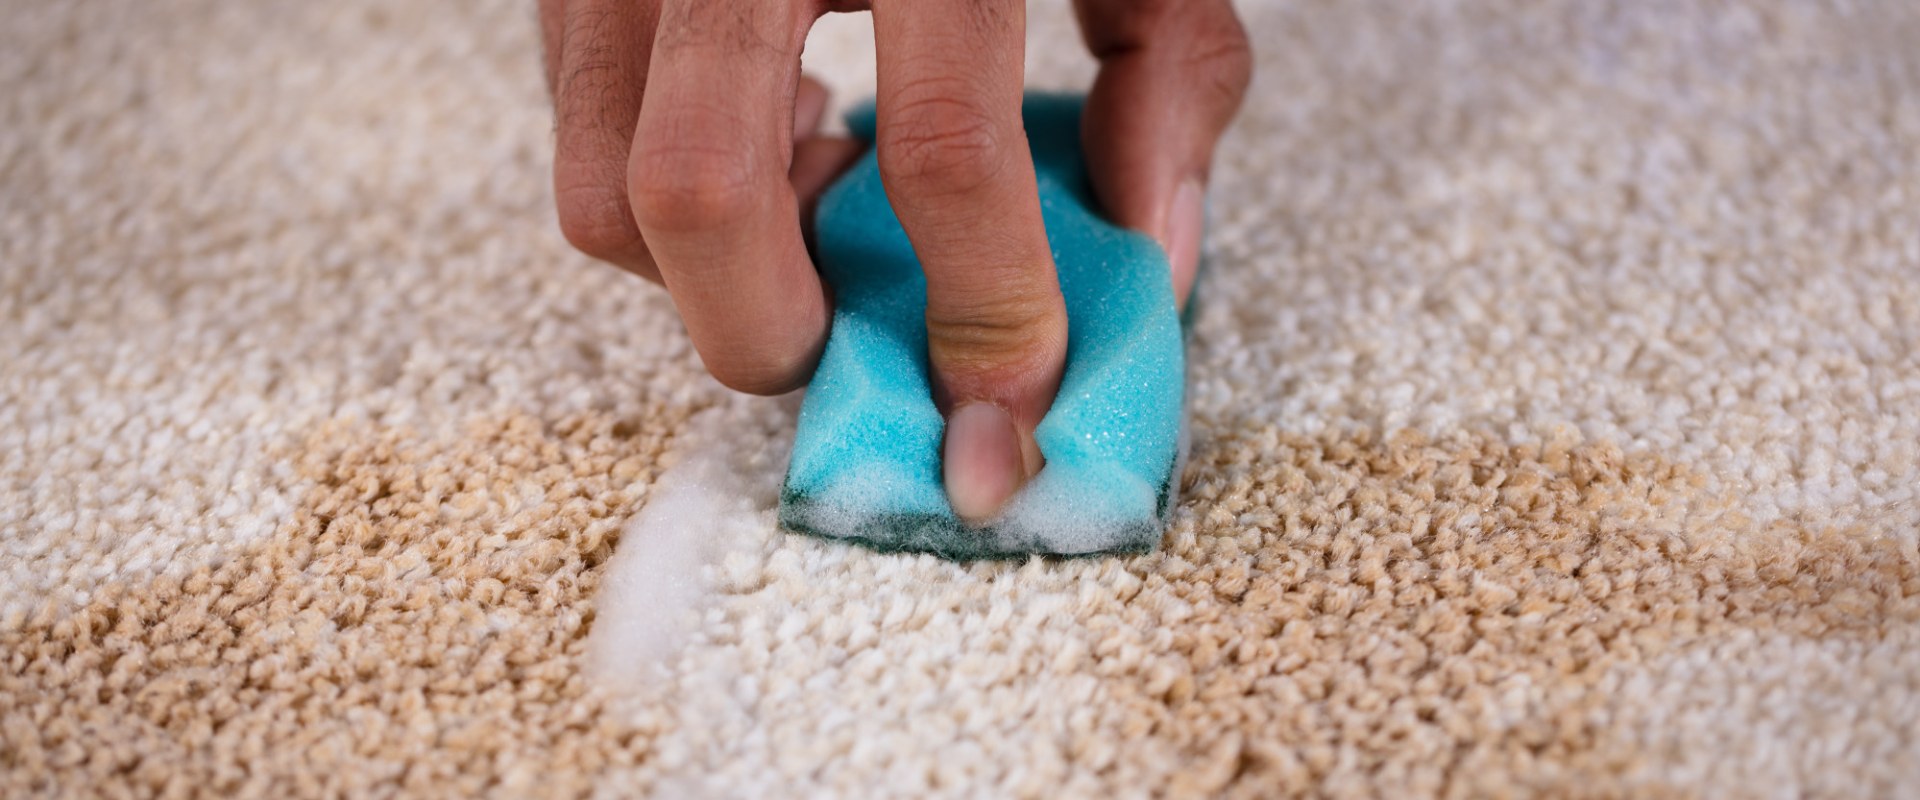 Can Professional Carpet Cleaners Get Rid of Old Stains?